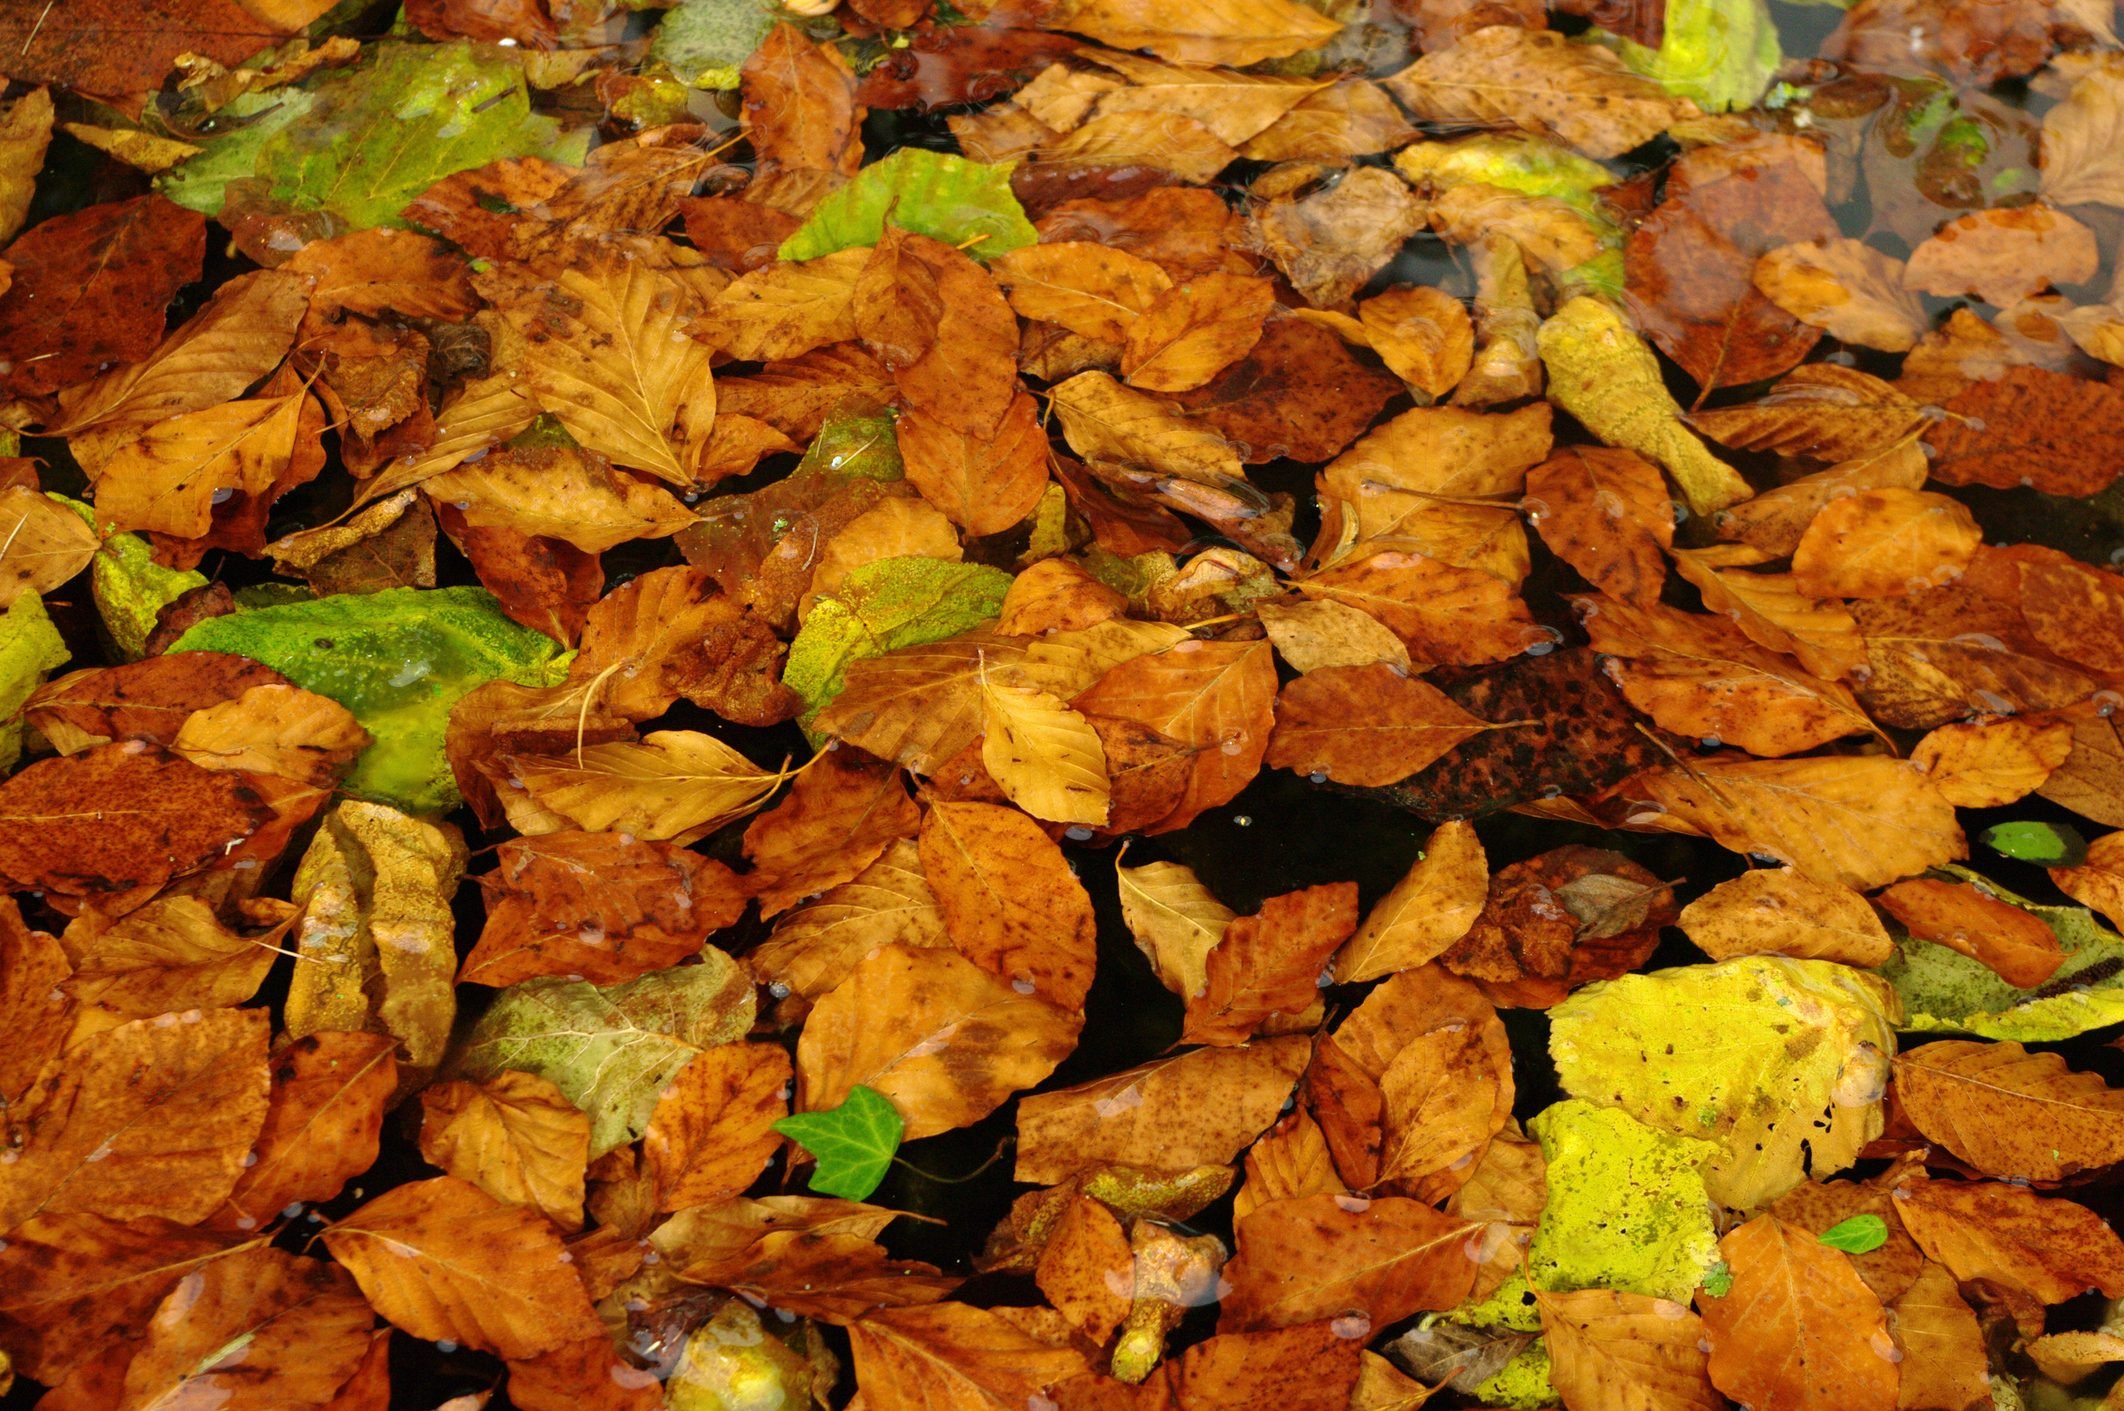 Europe, Germany, Bavaria: View Of Autumn Leaves Floating On Garden Pond